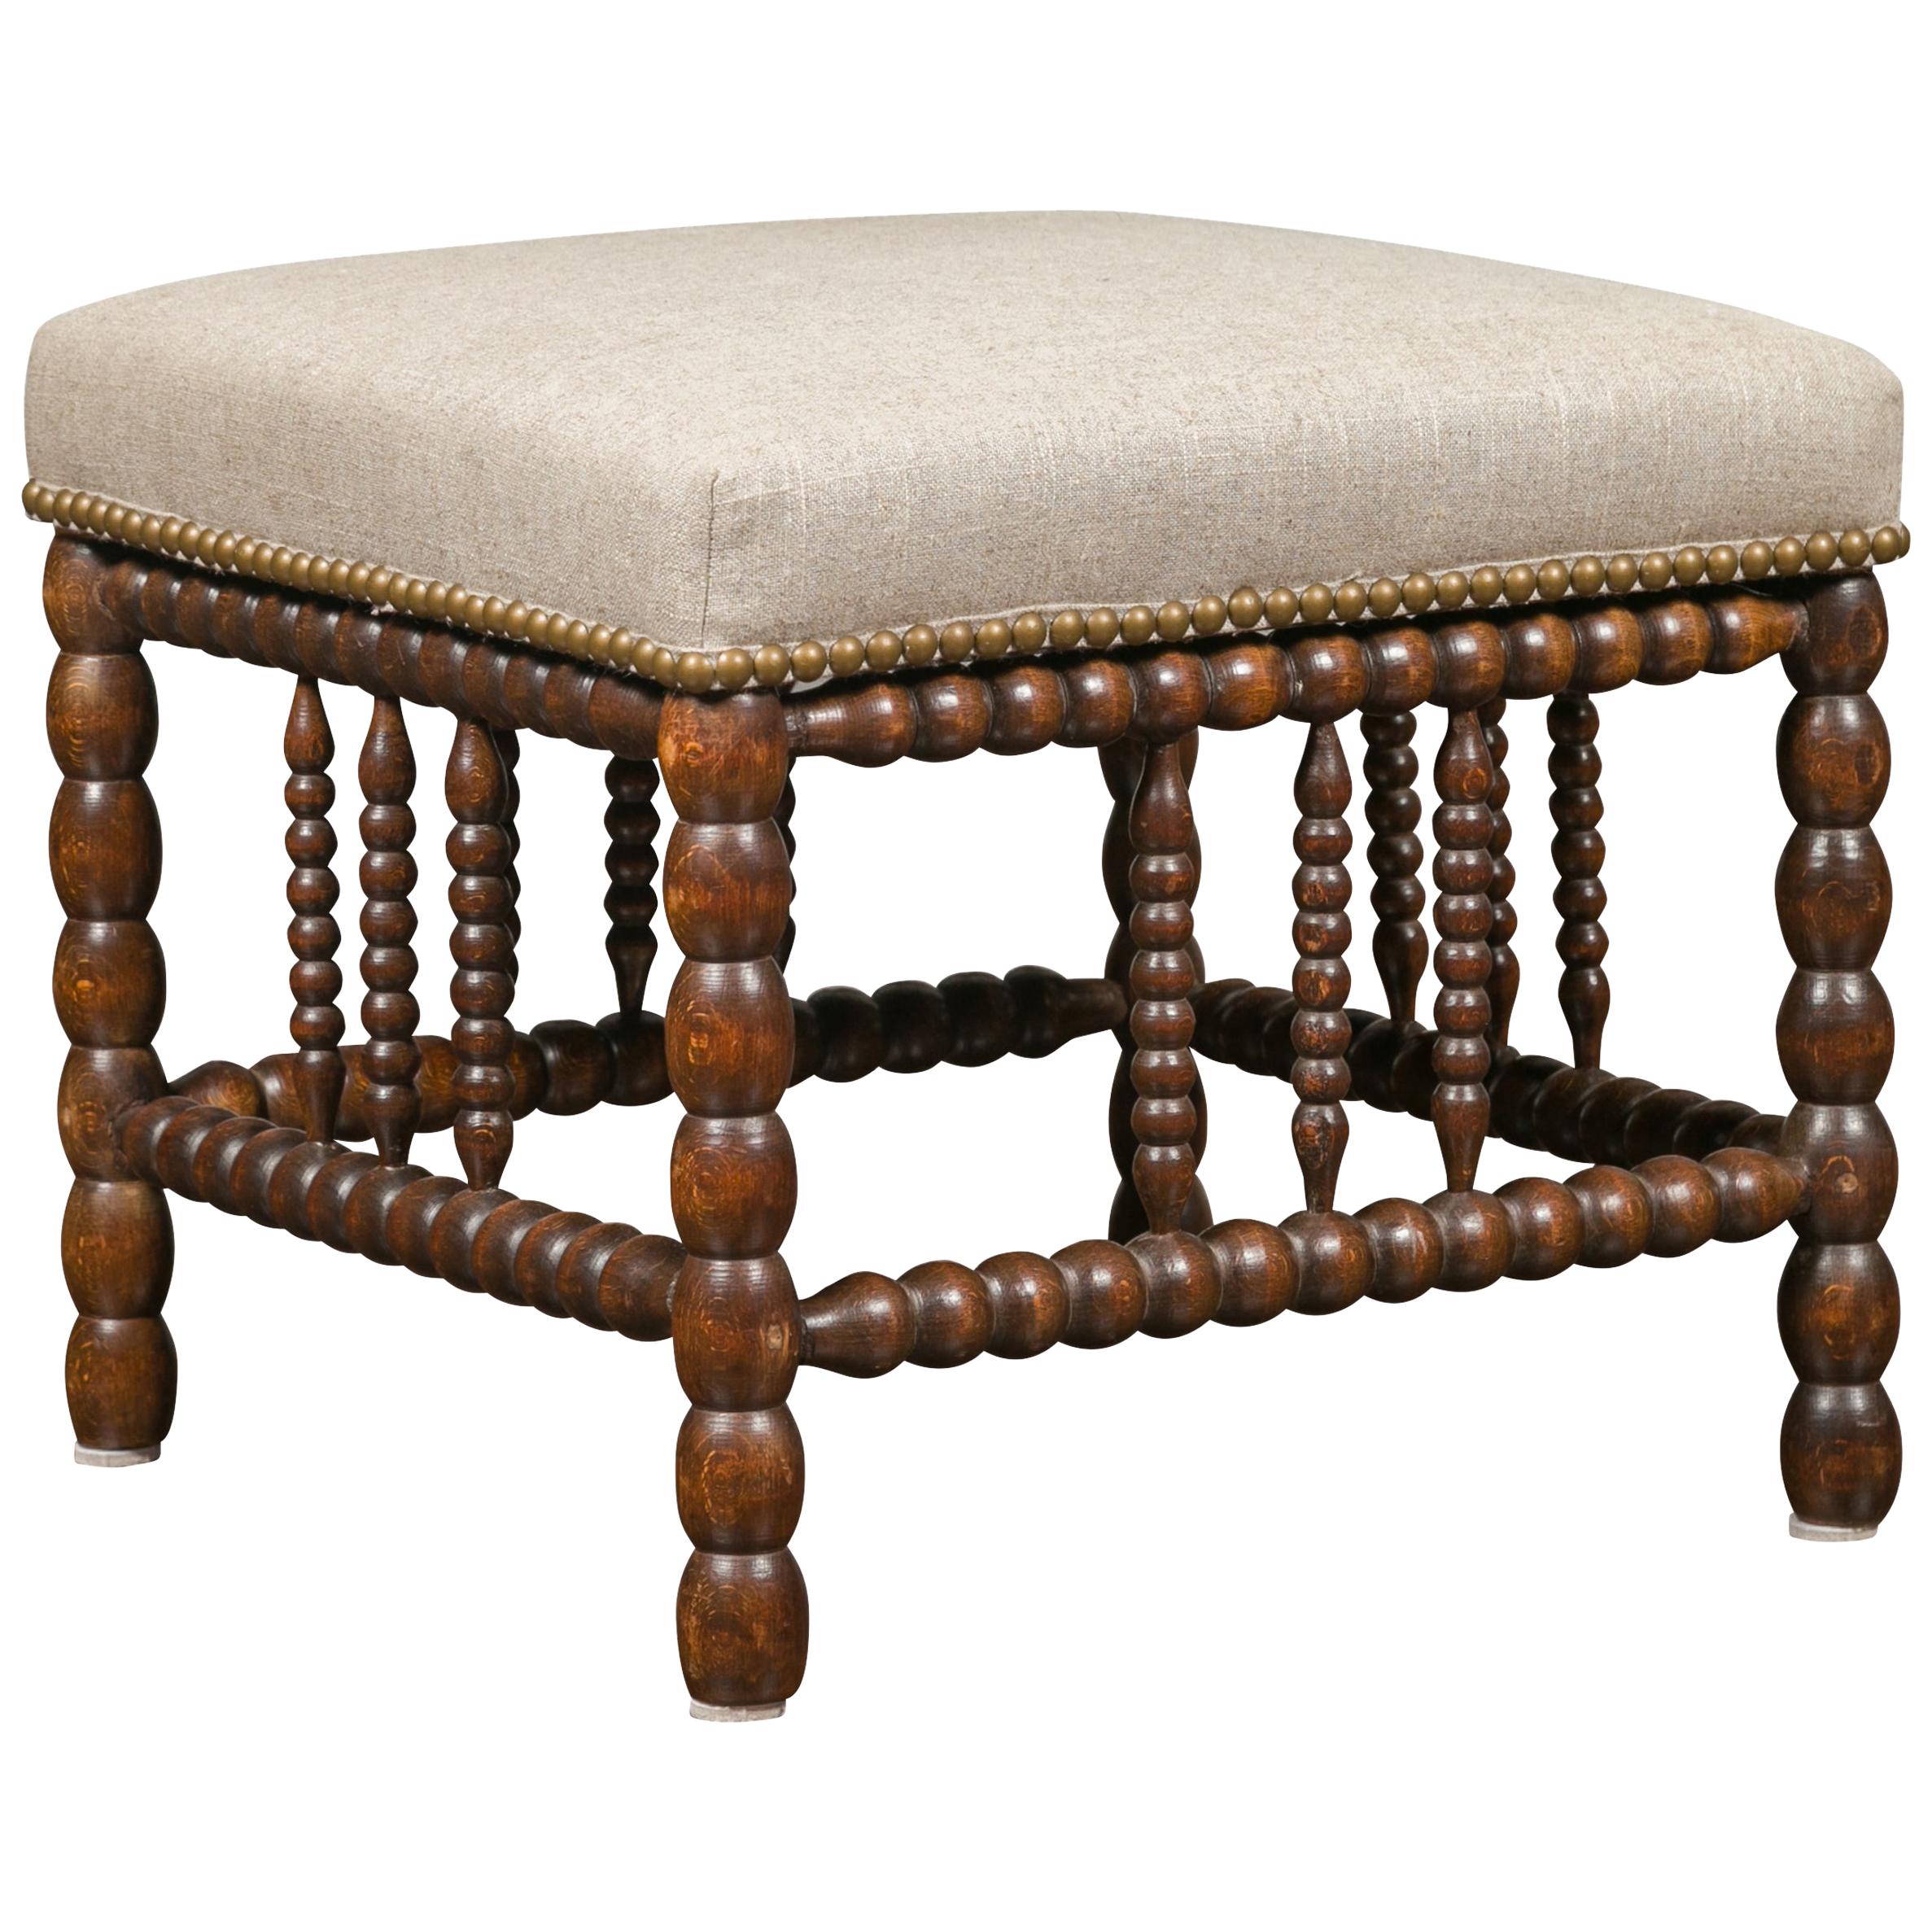 English 1900s Oak Footstool with Bobbin Legs, New Upholstery and Nailhead Trim